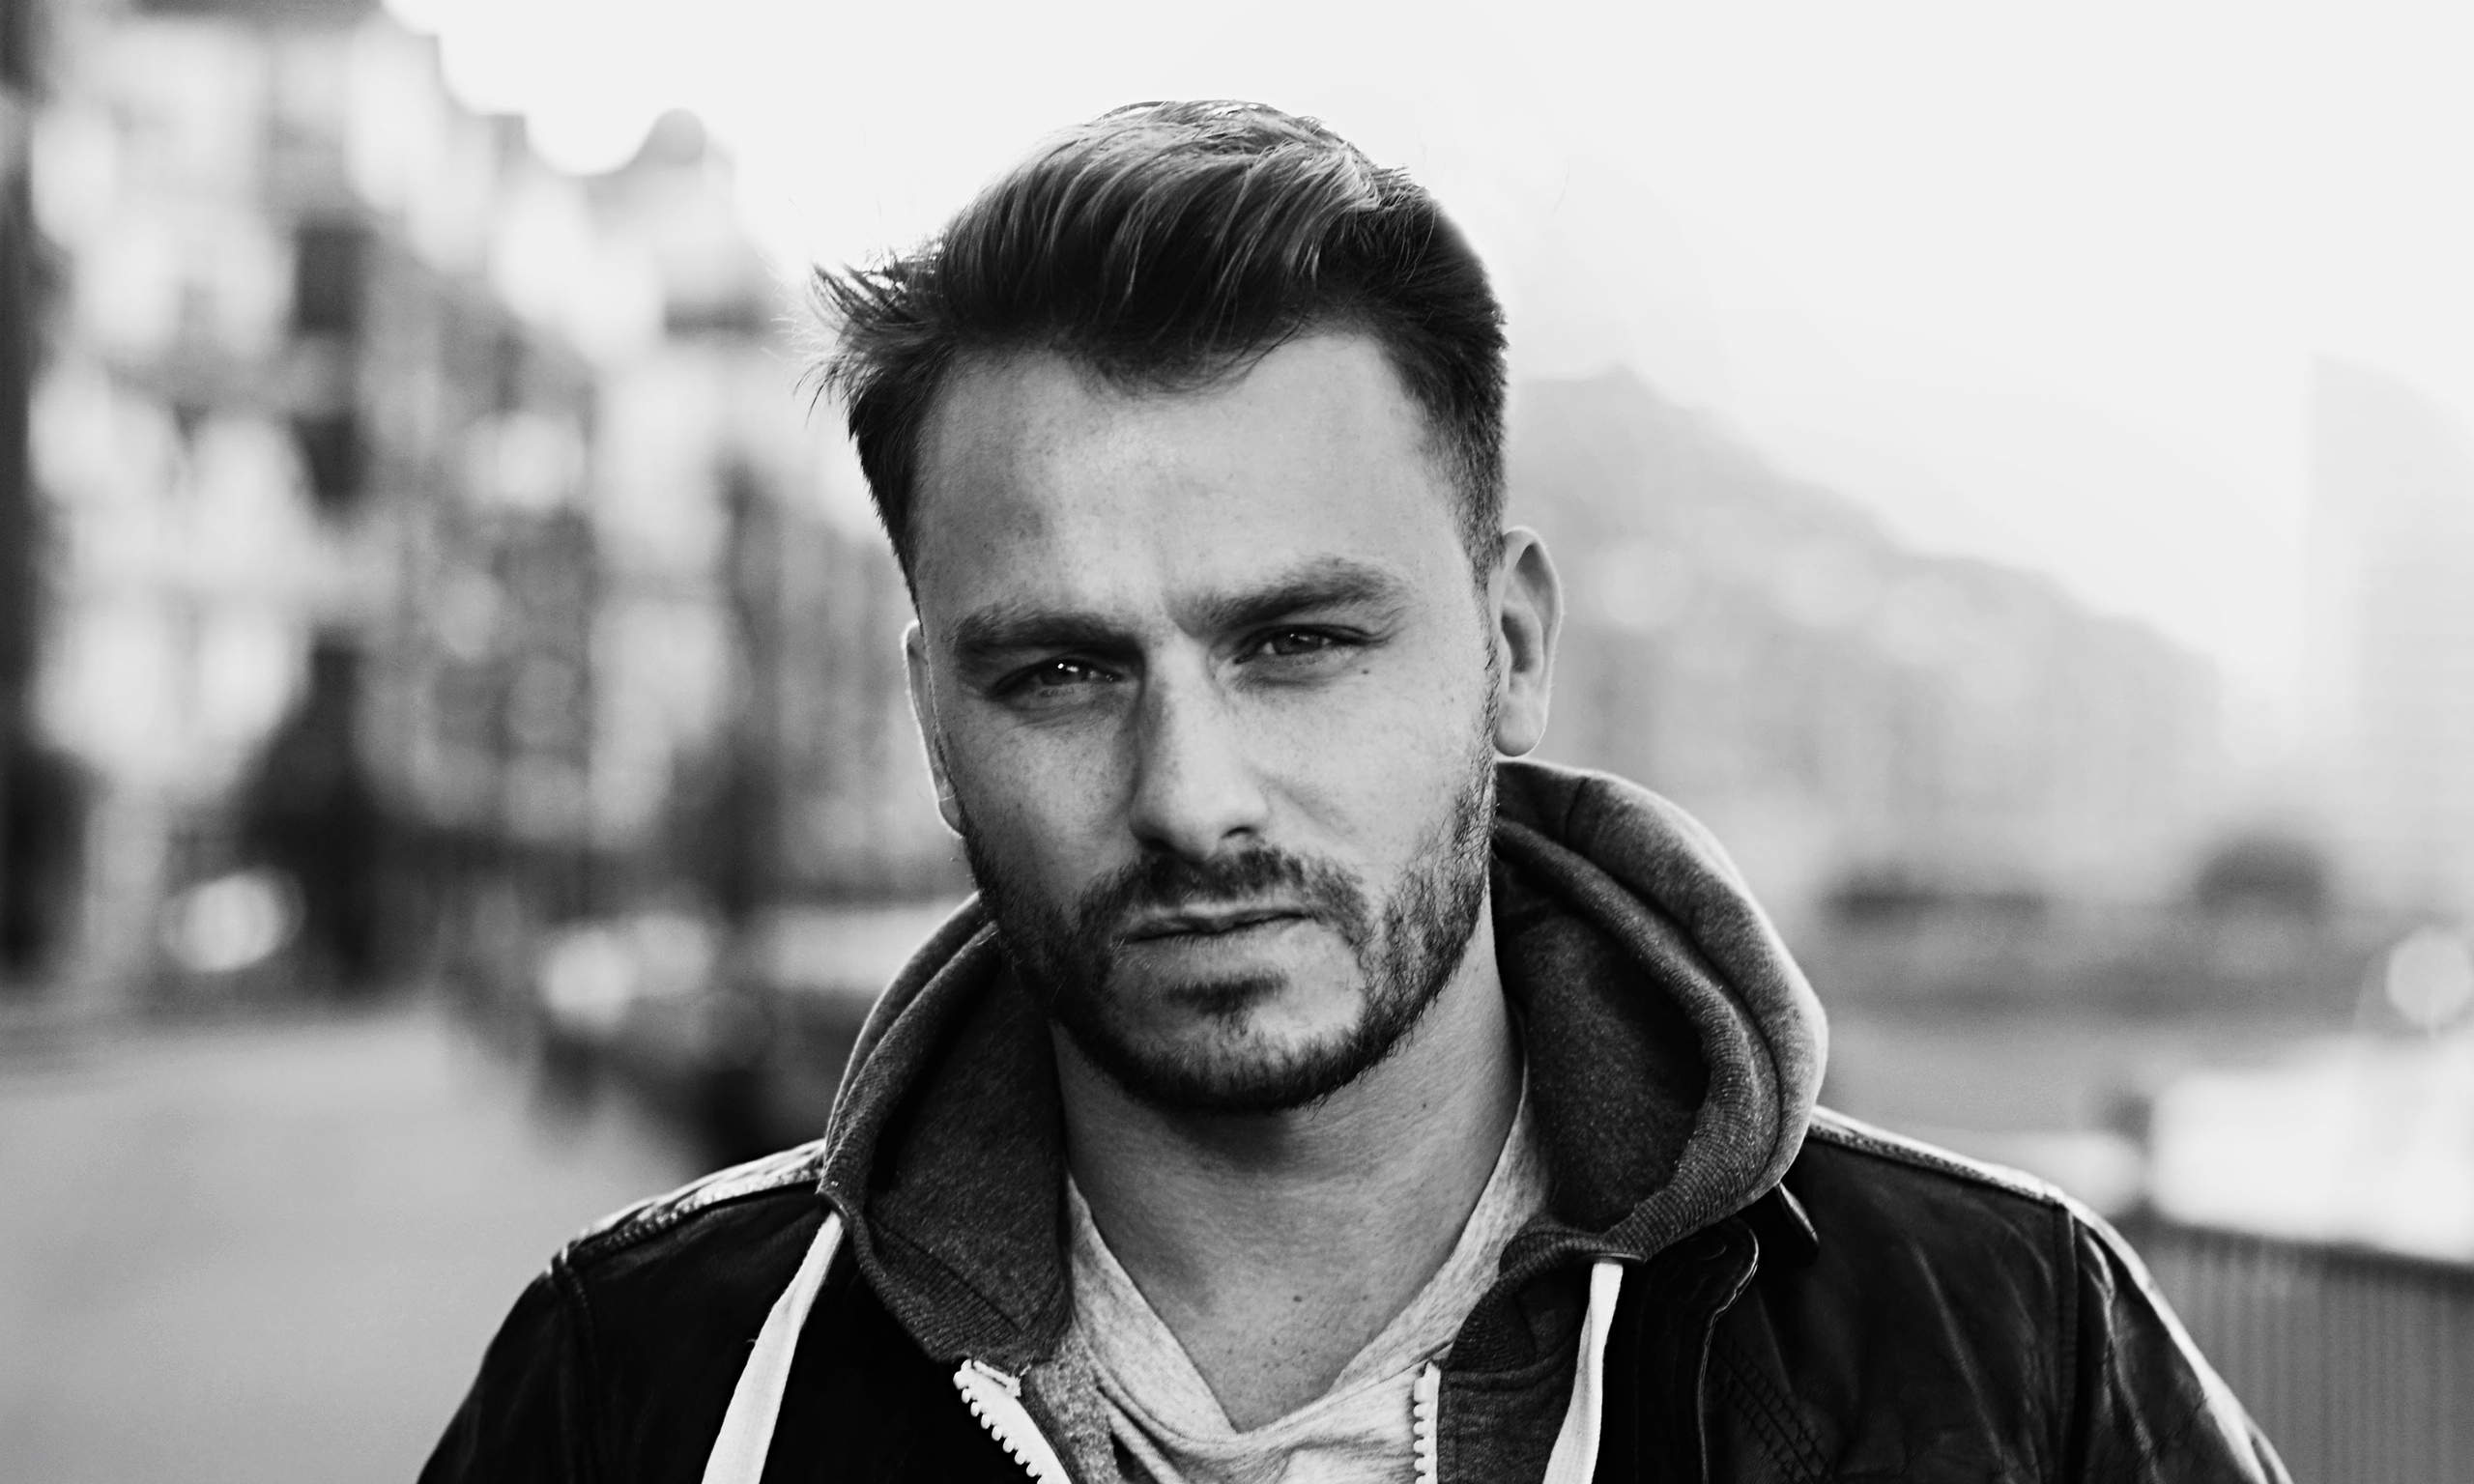 YouTube star Dapper Laughs lands his own ITV2 dating show | Media | The ...